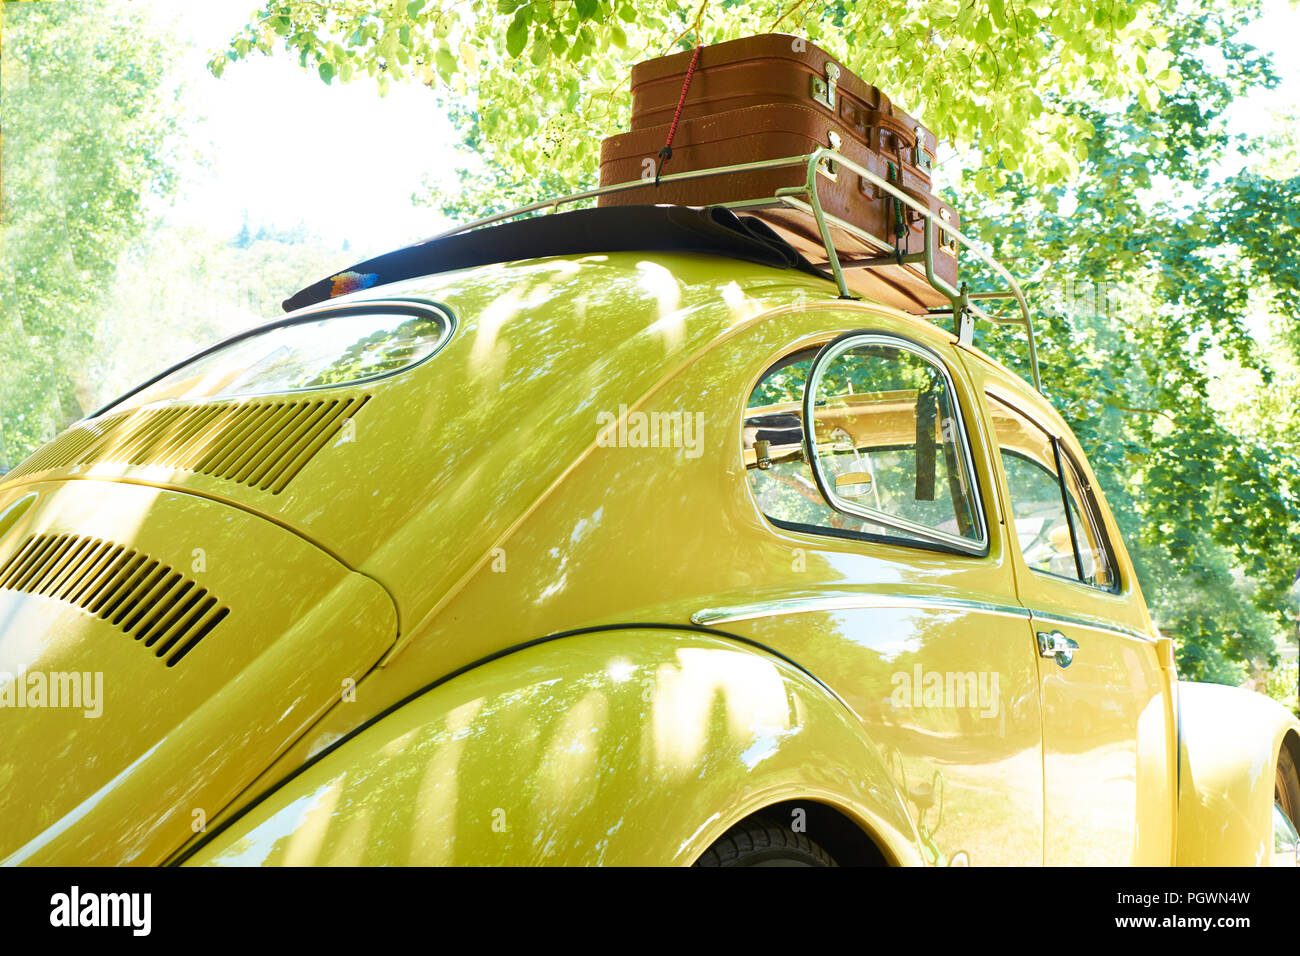 VW Beetle, built in 1957, vintage car, roof rack, travel suitcase, trip, into the green, Germany Stock Photo